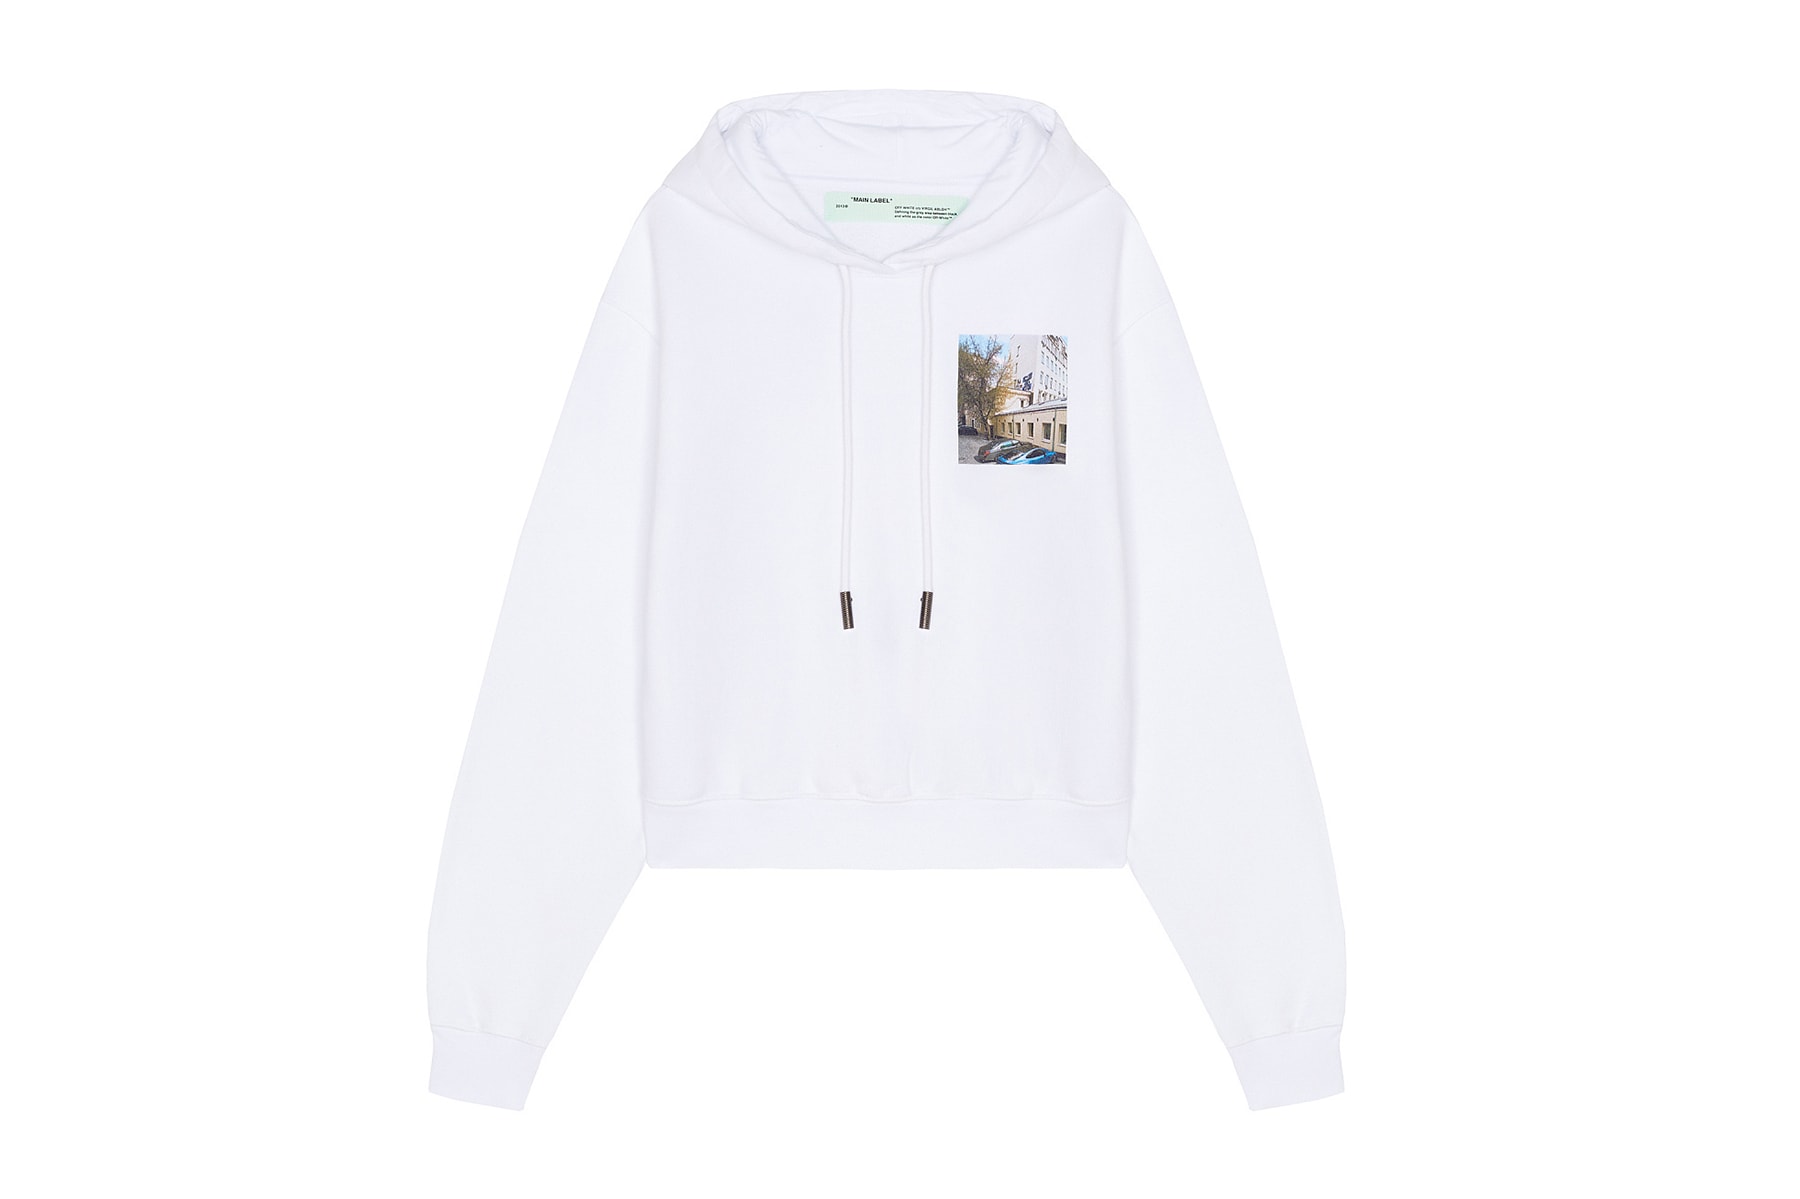 off white km20 exclusive capsule collection collaboration drop release date september 6 2018 panther hoodie tee shirt dress tulle socks belt industrial logo branding graphics limited russia store socks sweatpants track cycling long sleeve short white black